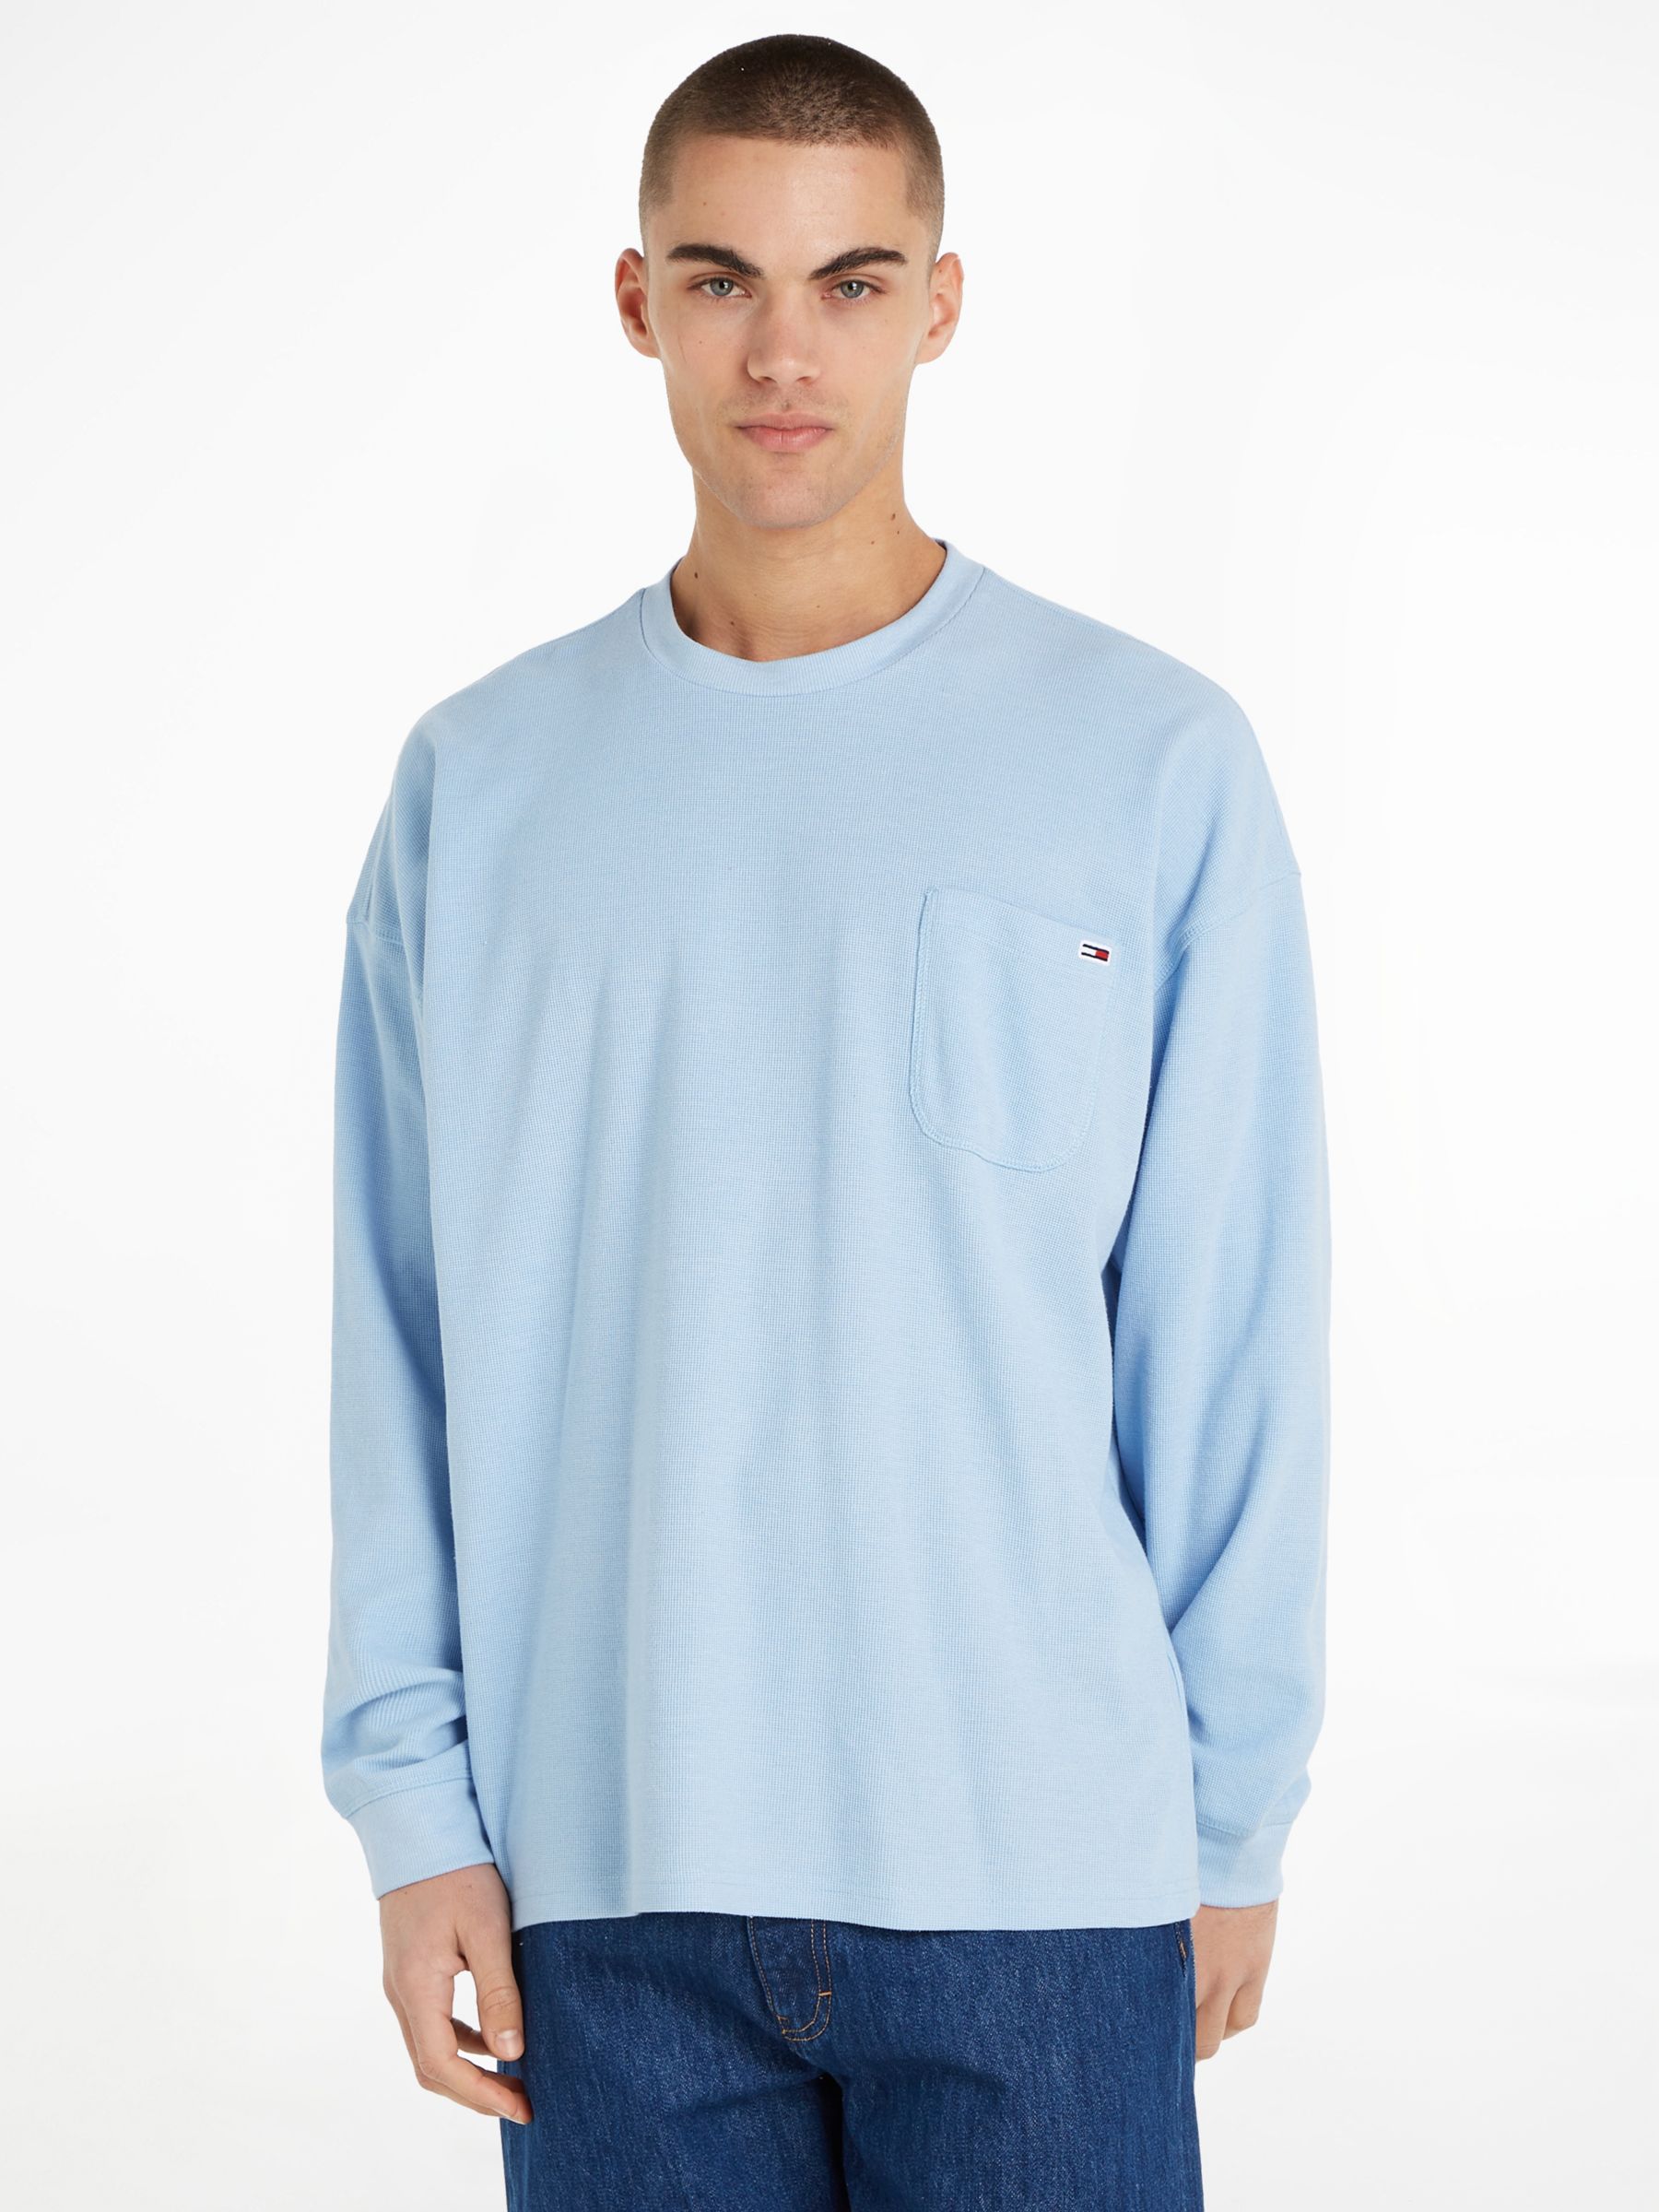 Tommy Jeans Long Sleeve T-Shirt, Chambray Blue at John Lewis & Partners